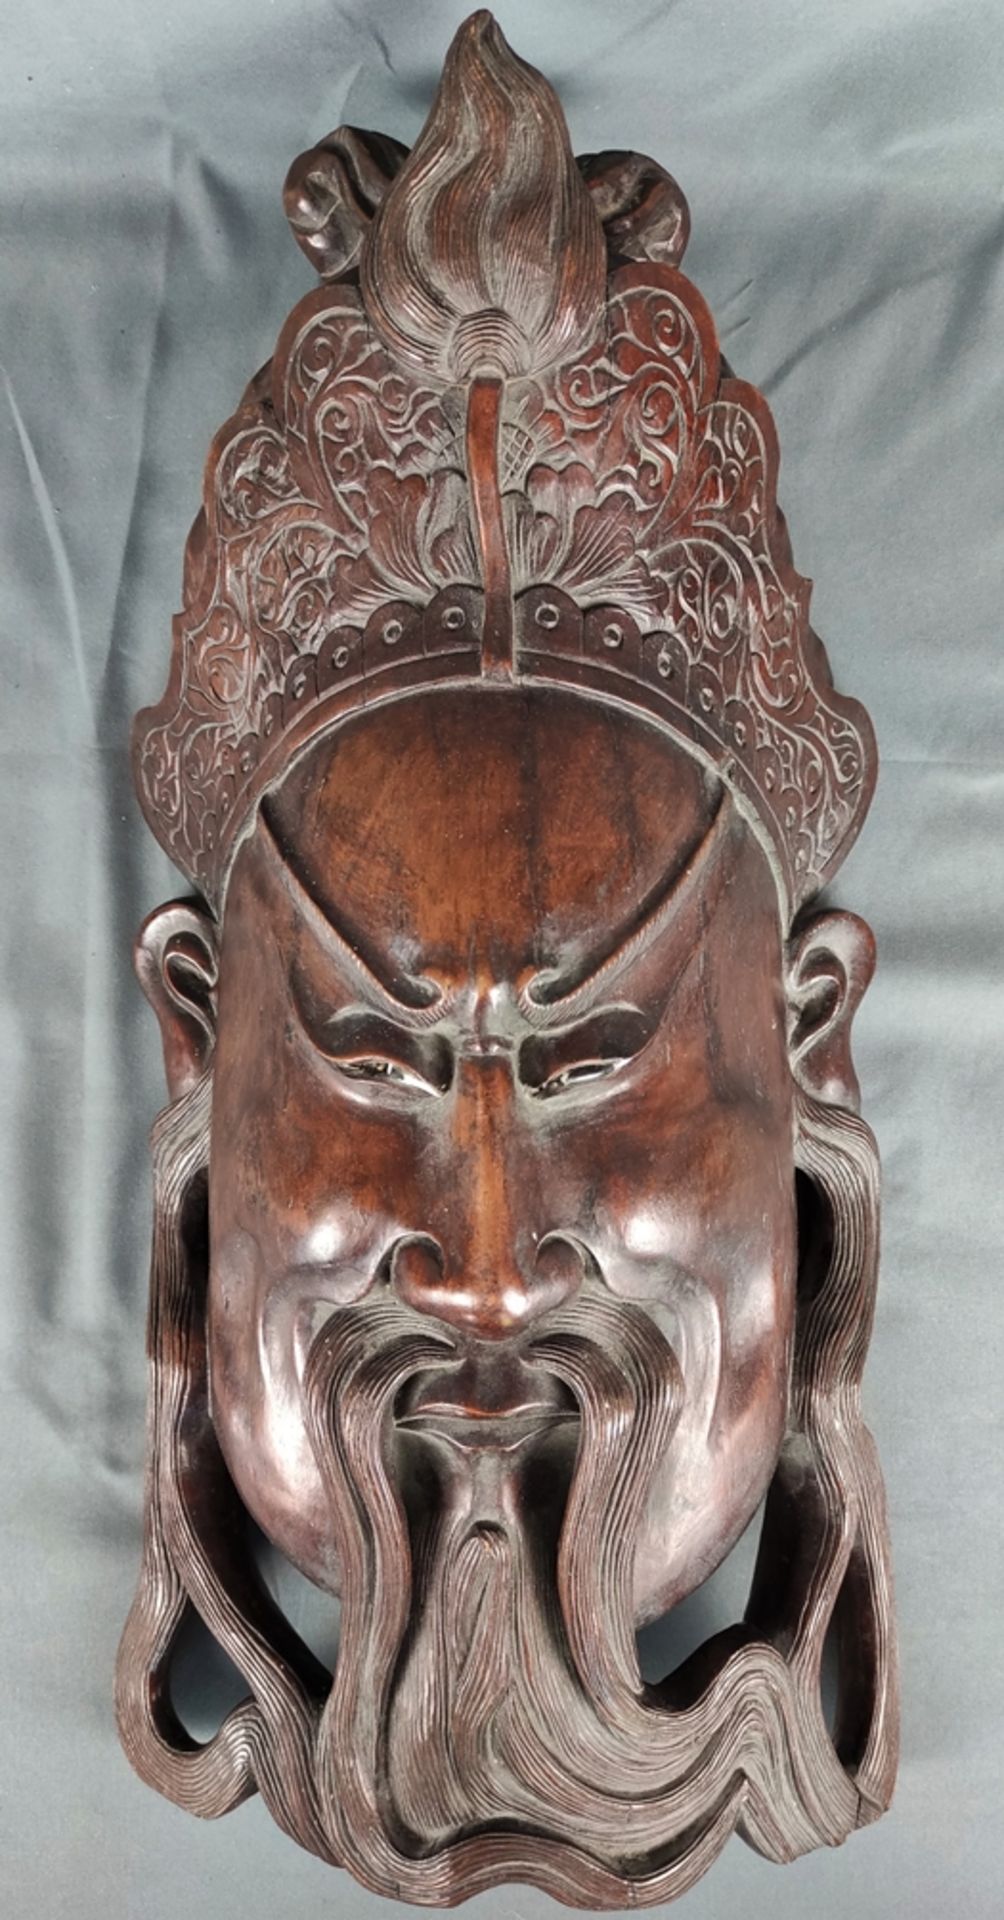 Big asian mask, face crowned with lotus flower, curved beard, eyes inserted (partly damaged), heavy